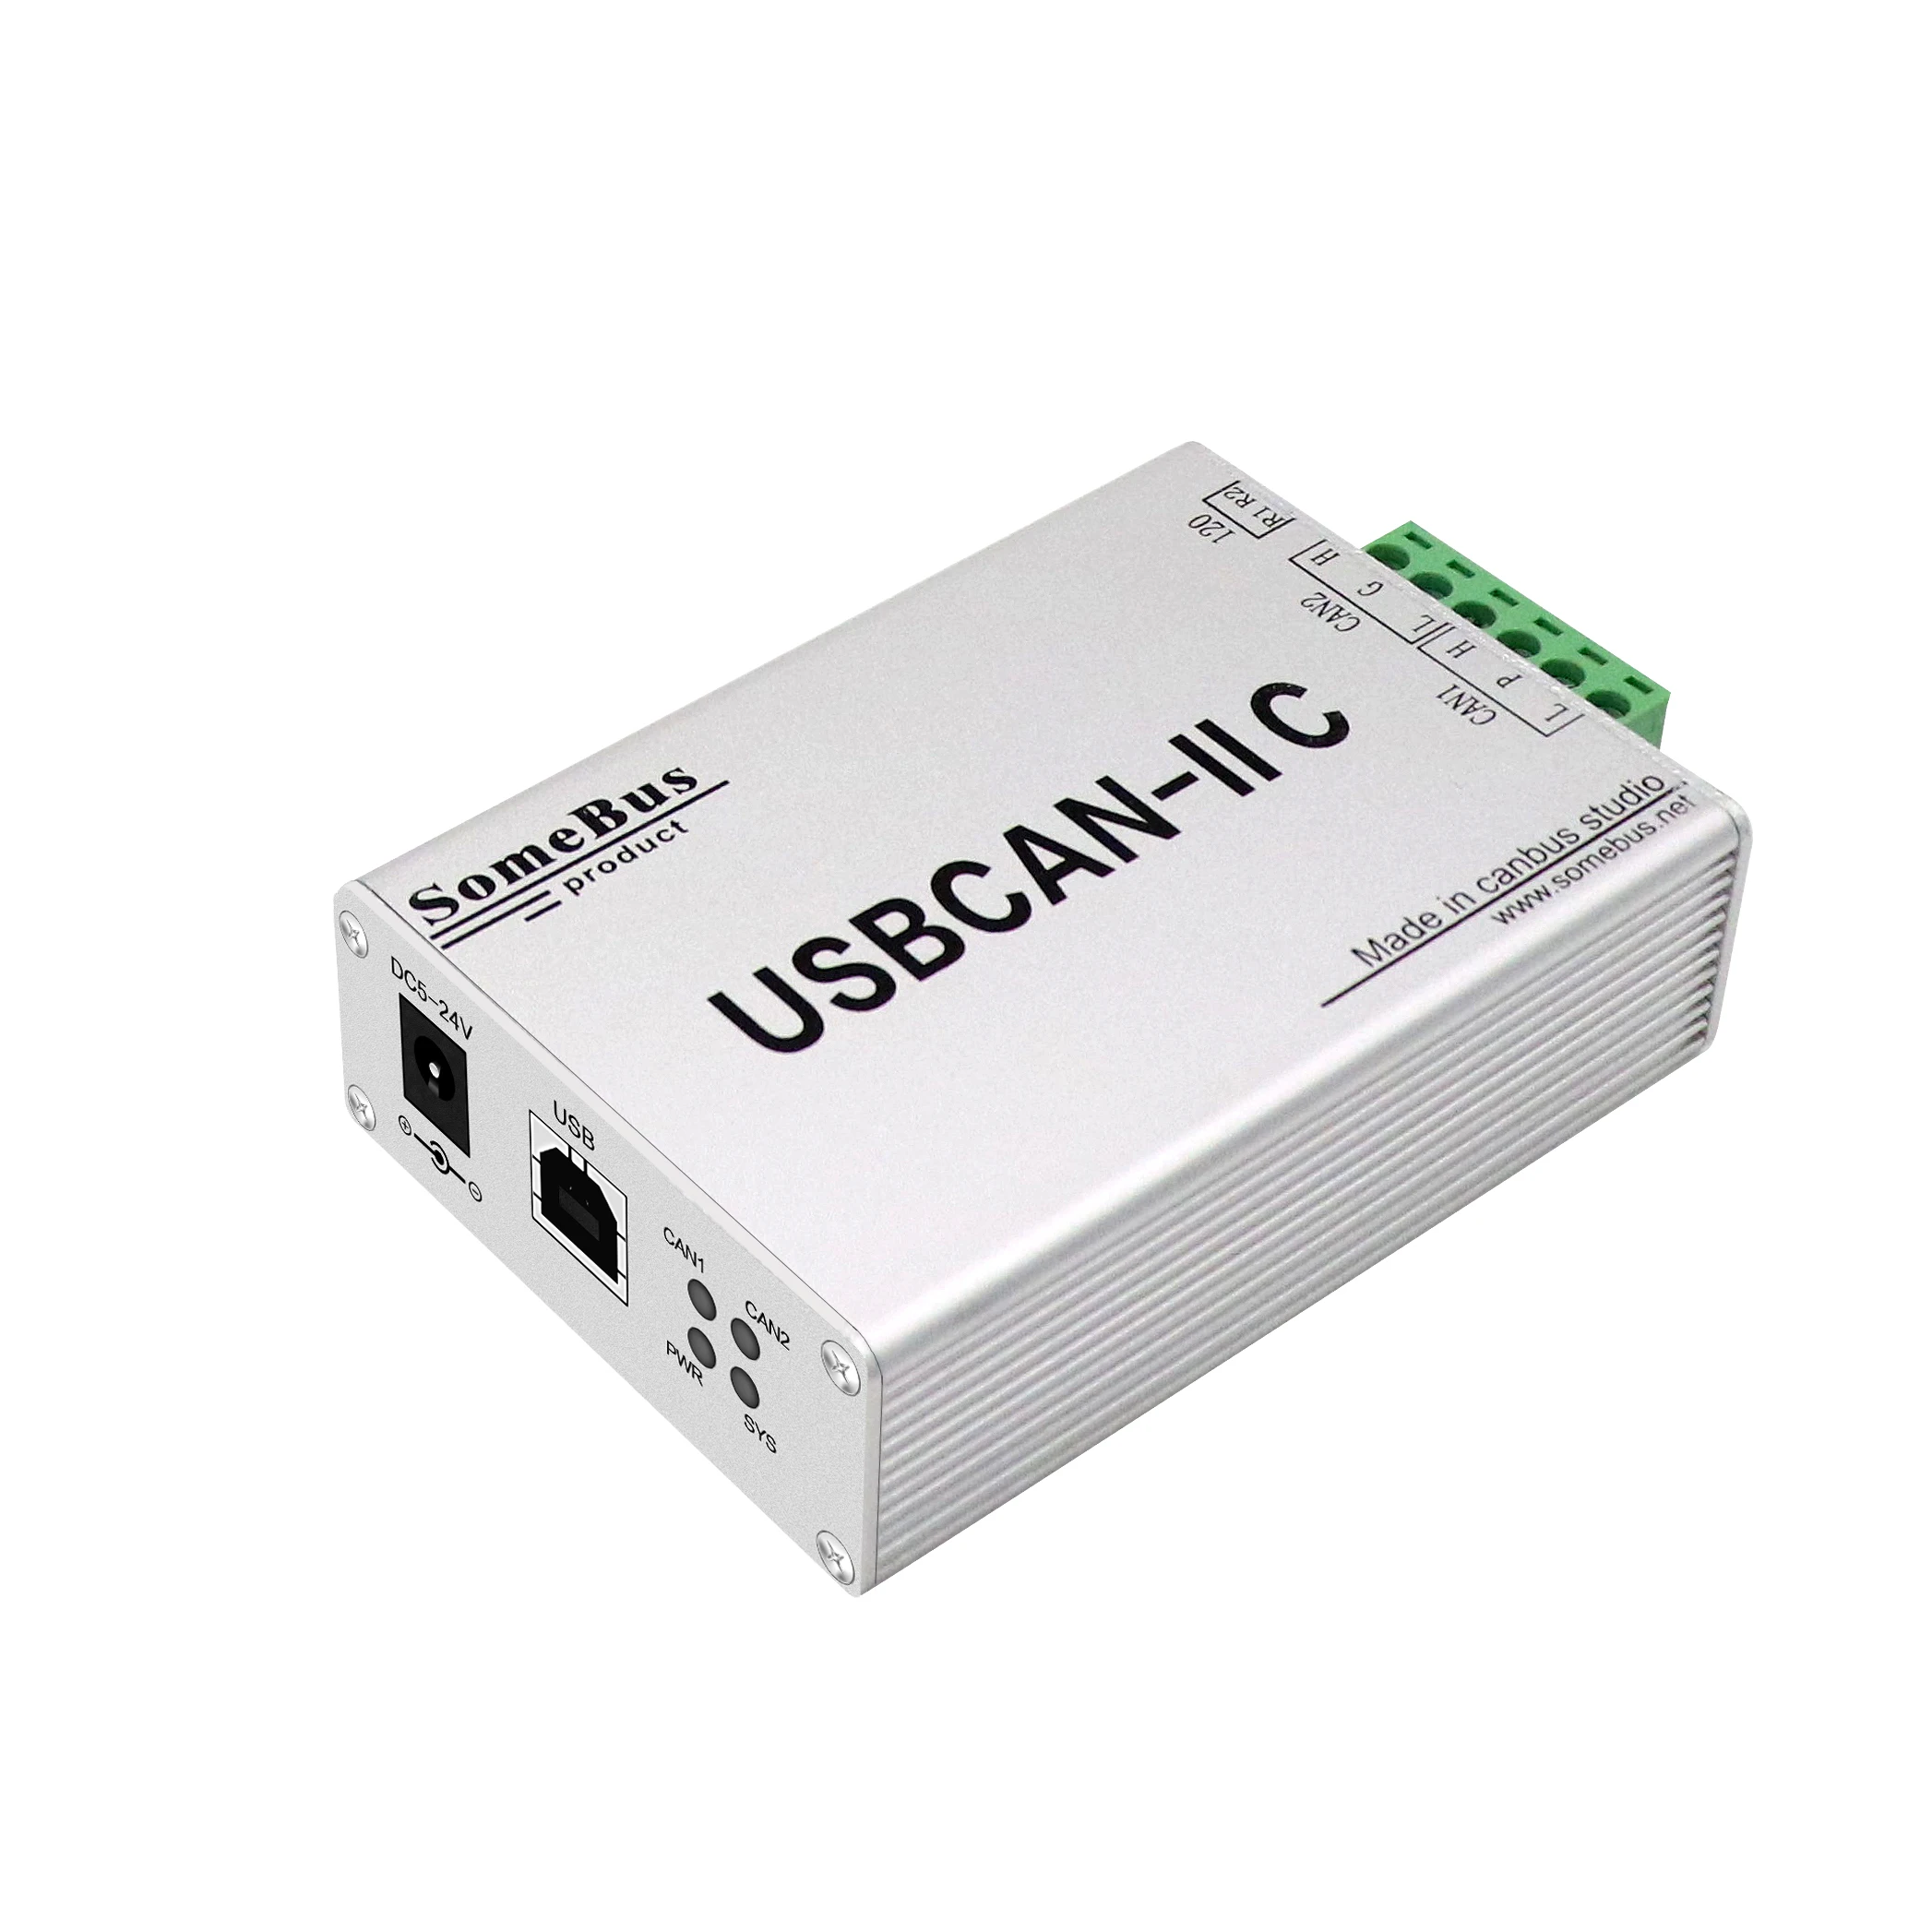 GCAN USBCAN-II C CAN-Bus Analyser/Communication Interface Card,Industrial USB to CAN Box,CAN Data Analysis Tool